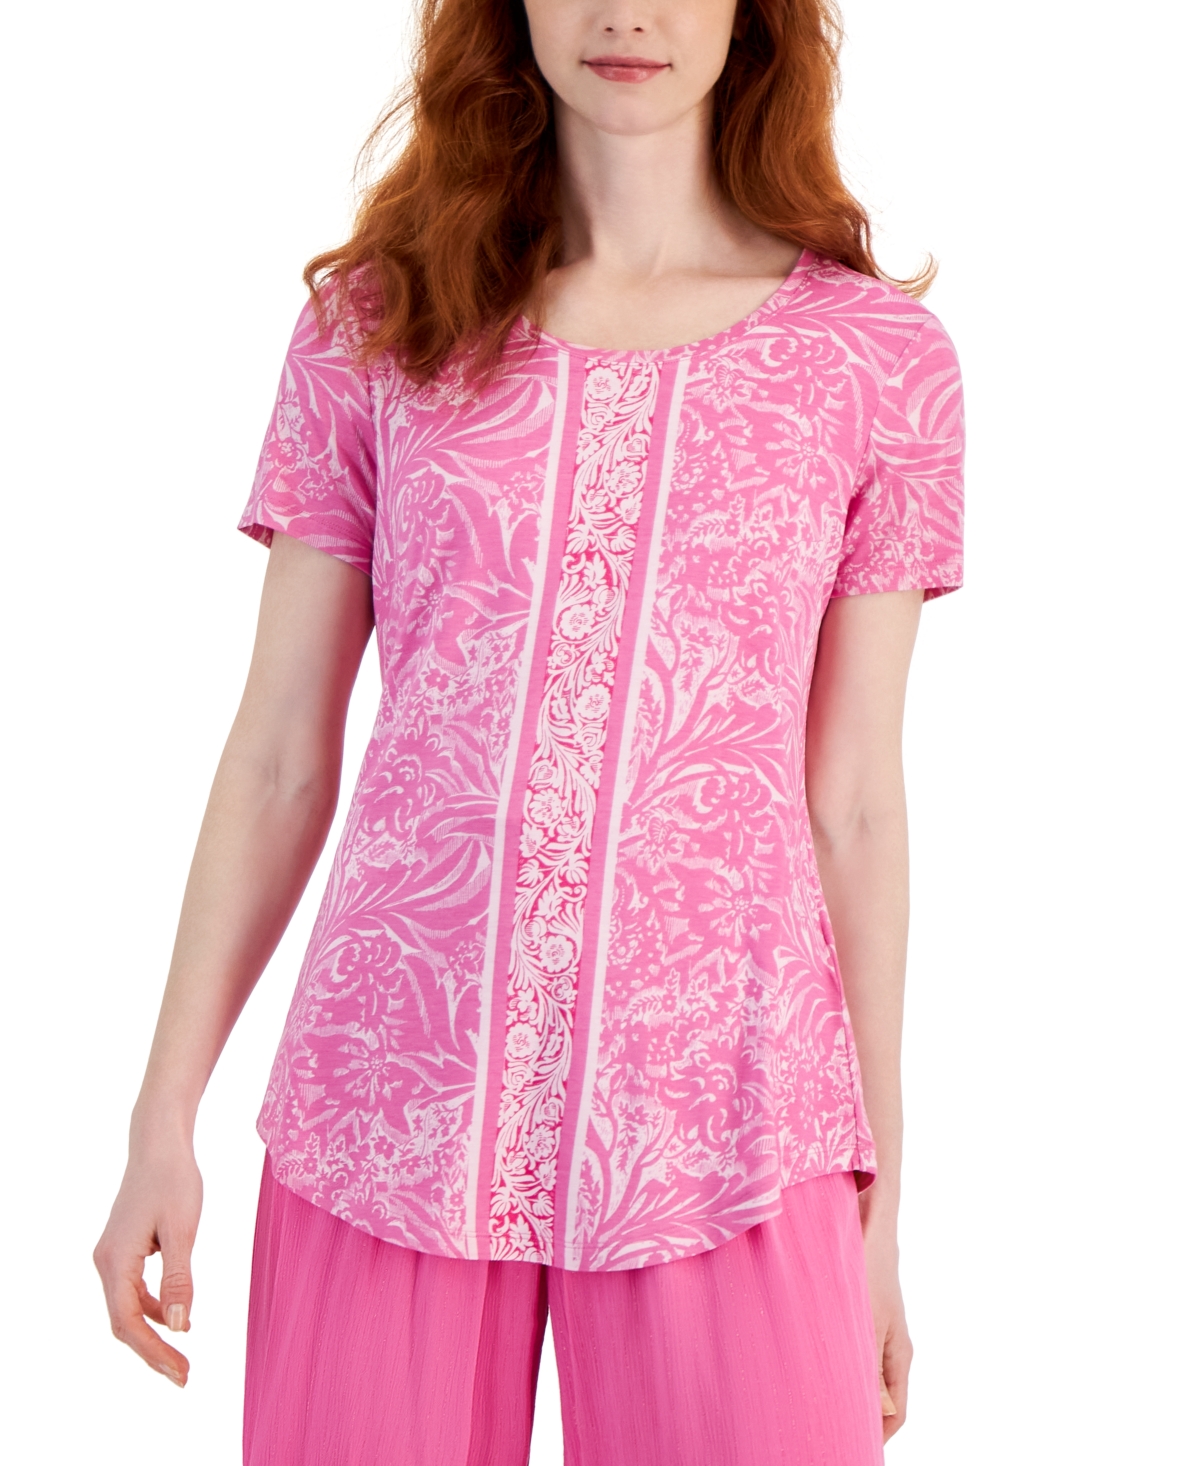 Women's Printed Knit Short Sleeve Top, Created for Macy's - Bright Pink Combo